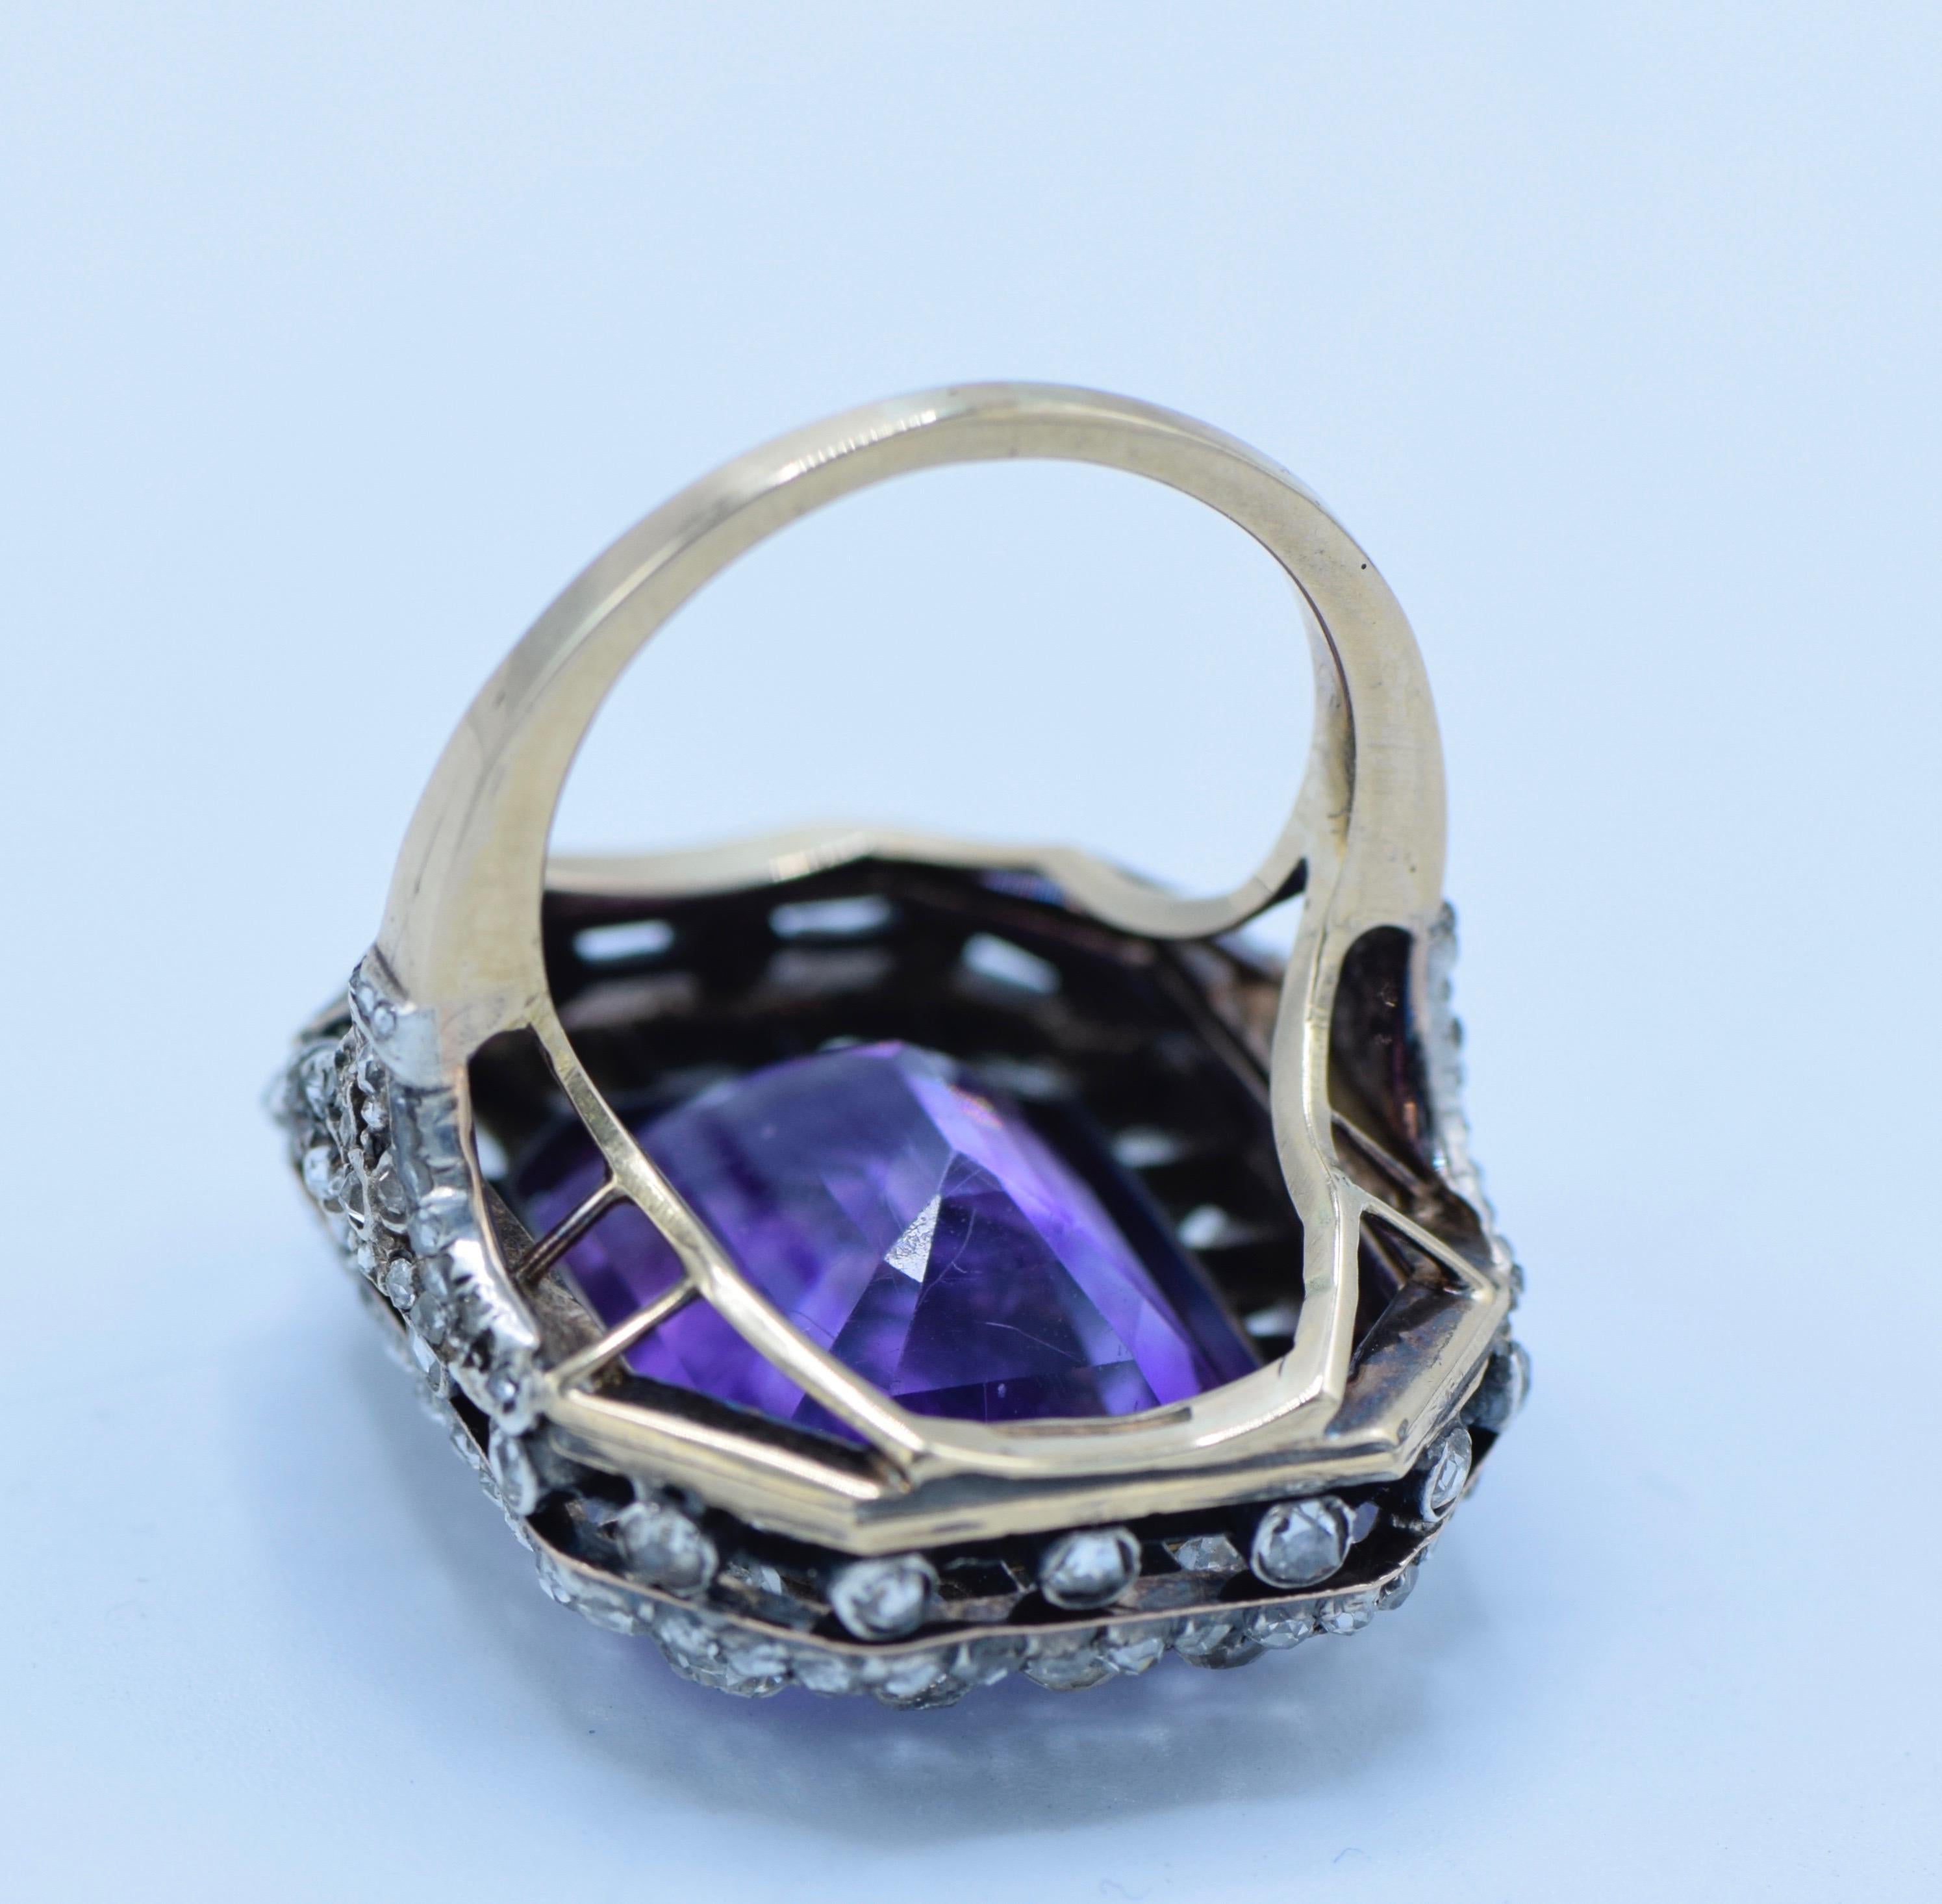 Very beautiful Antique Diamond Amethyst Ring mounted in silver and gold, surrounded by old cushion cut diamonds and additional smaller rose cut diamond.
The Amethysts has a very pleasant color and is a clean bright stone 

Amethyst weight: 12- 15